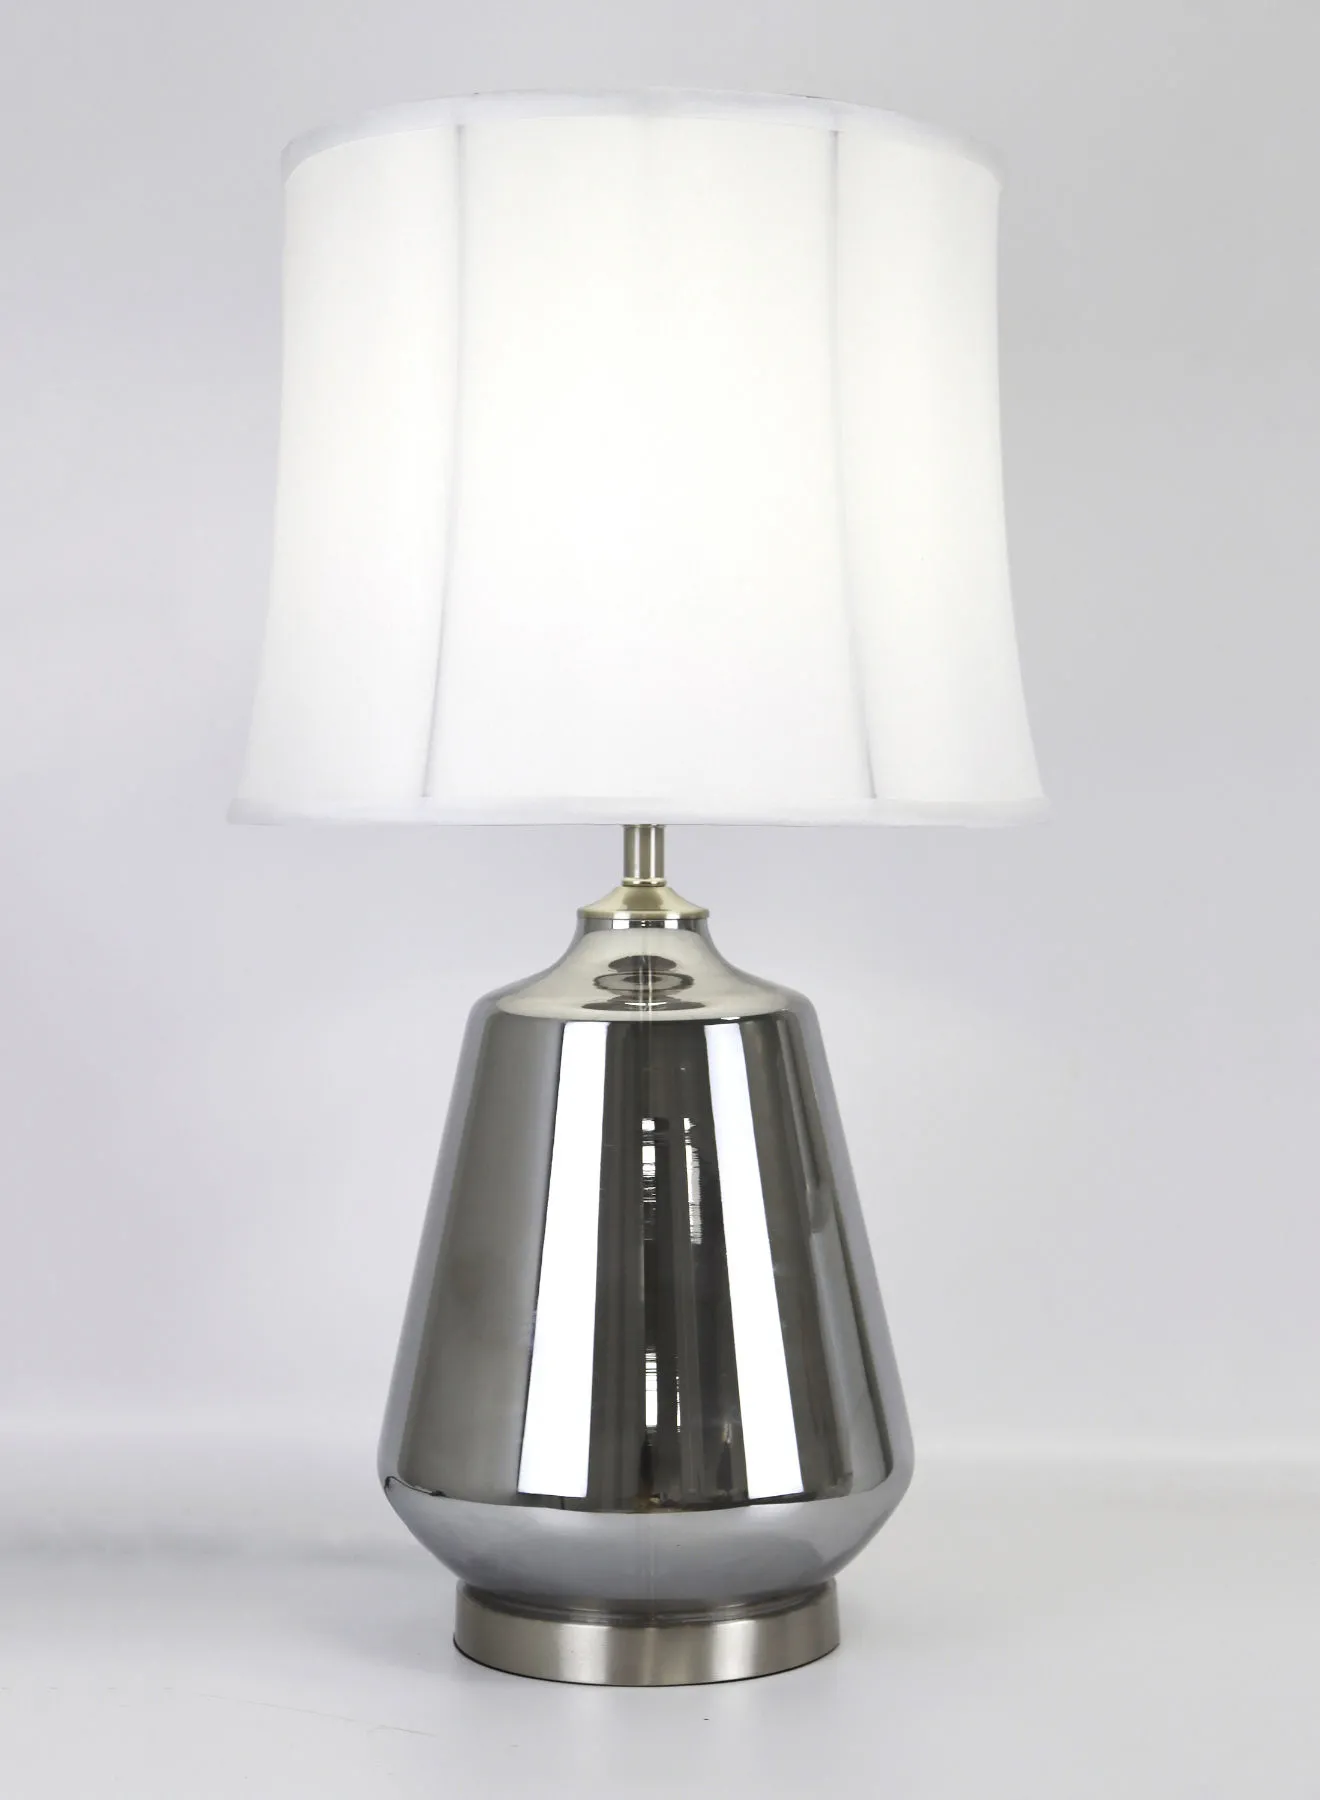 ebb & flow Modern Design Glass Table Lamp Unique Luxury Quality Material for the Perfect Stylish Home RSN71014 Chrome 15 x 27